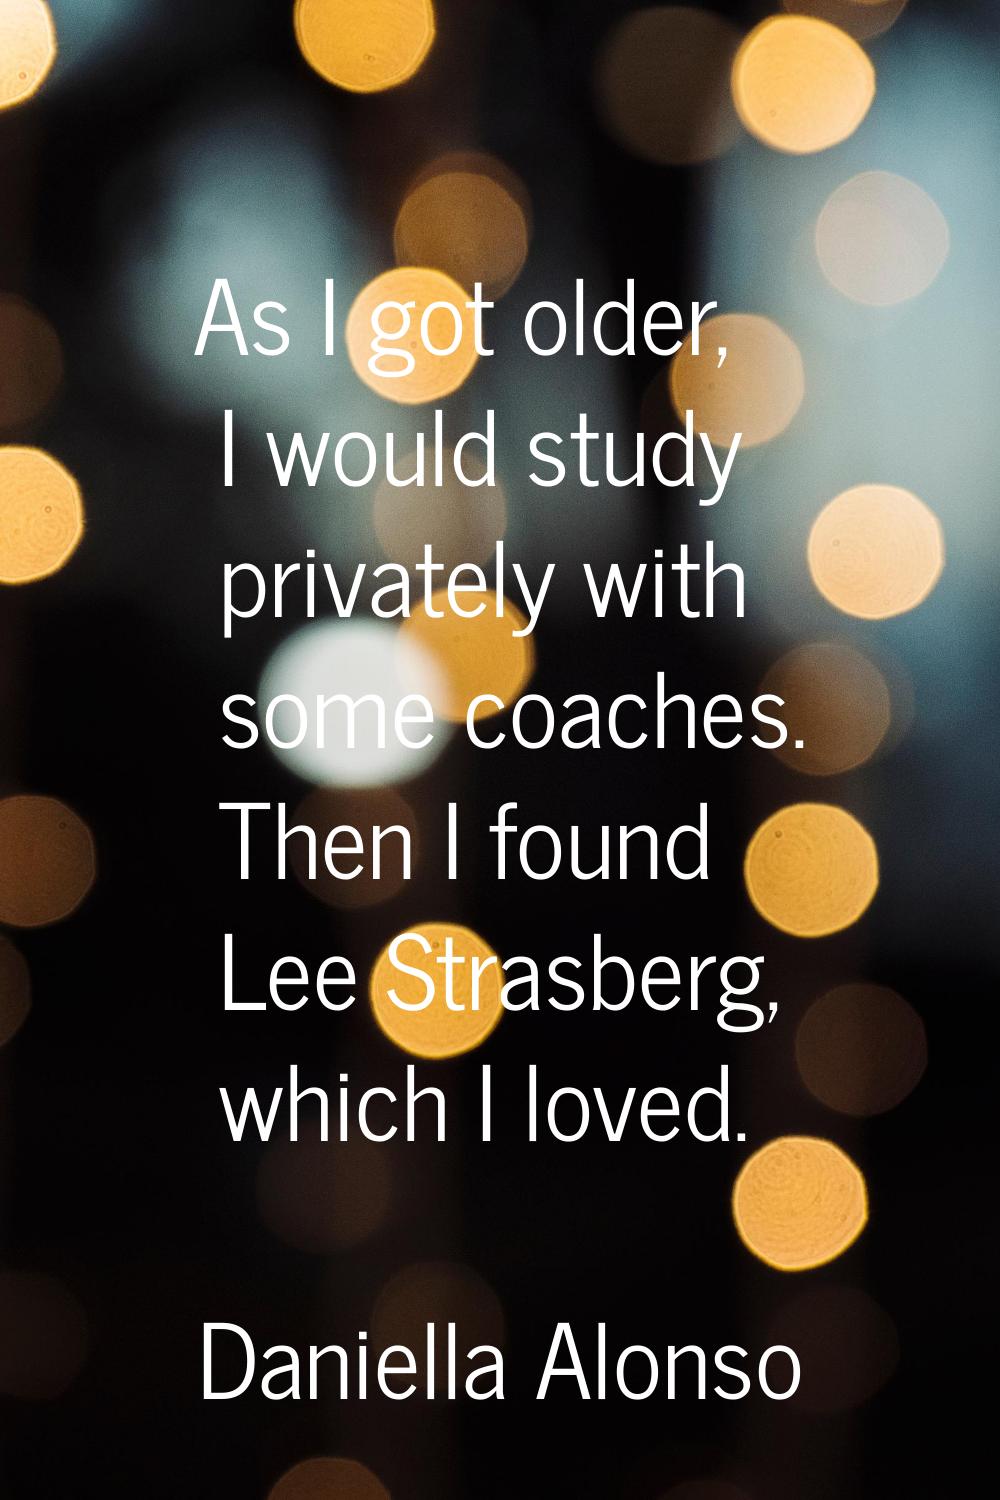 As I got older, I would study privately with some coaches. Then I found Lee Strasberg, which I love